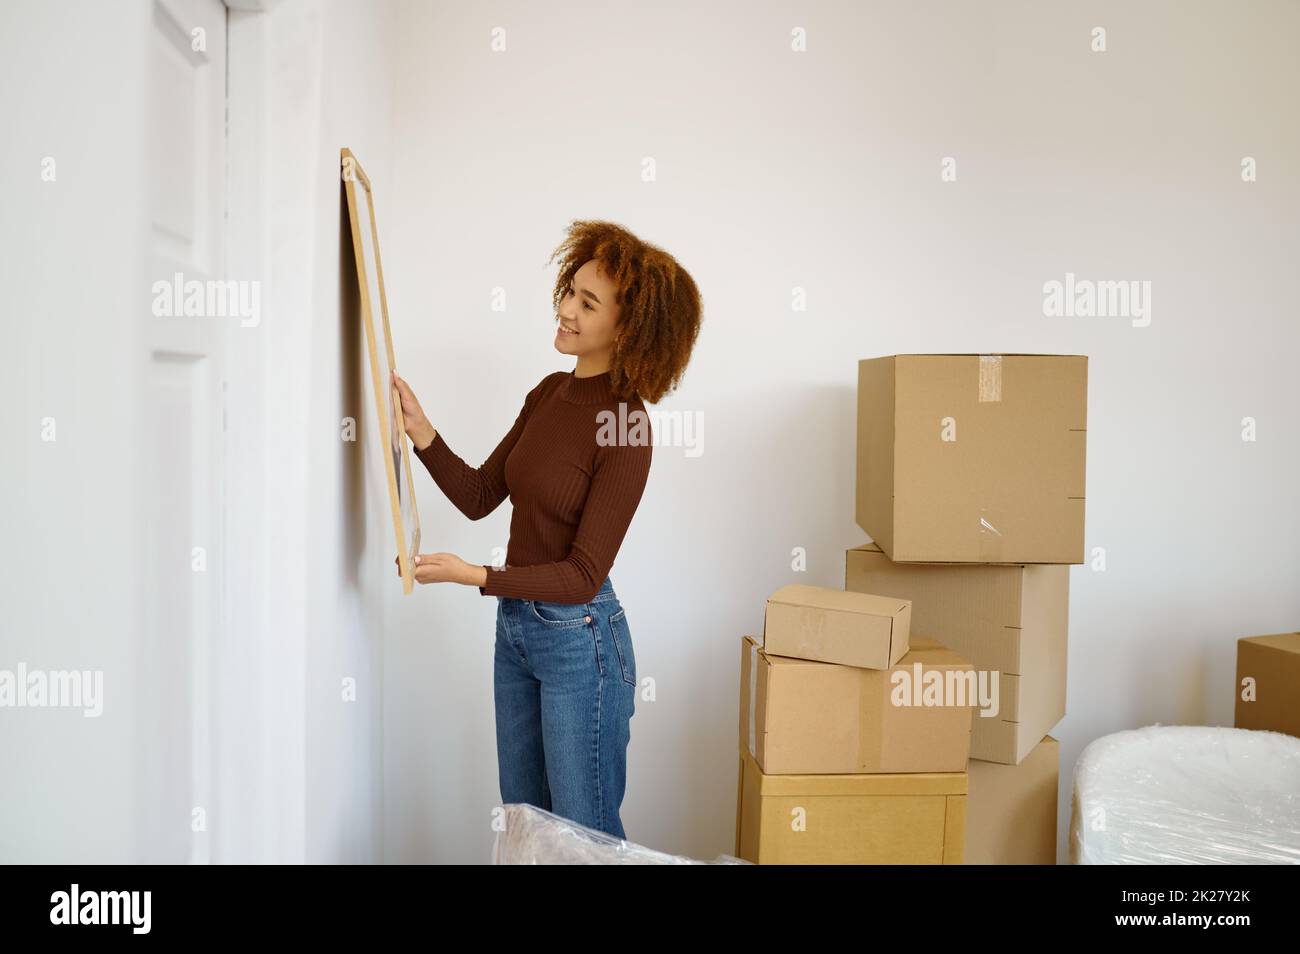 Woman hanging picture on the wall Stock Photo